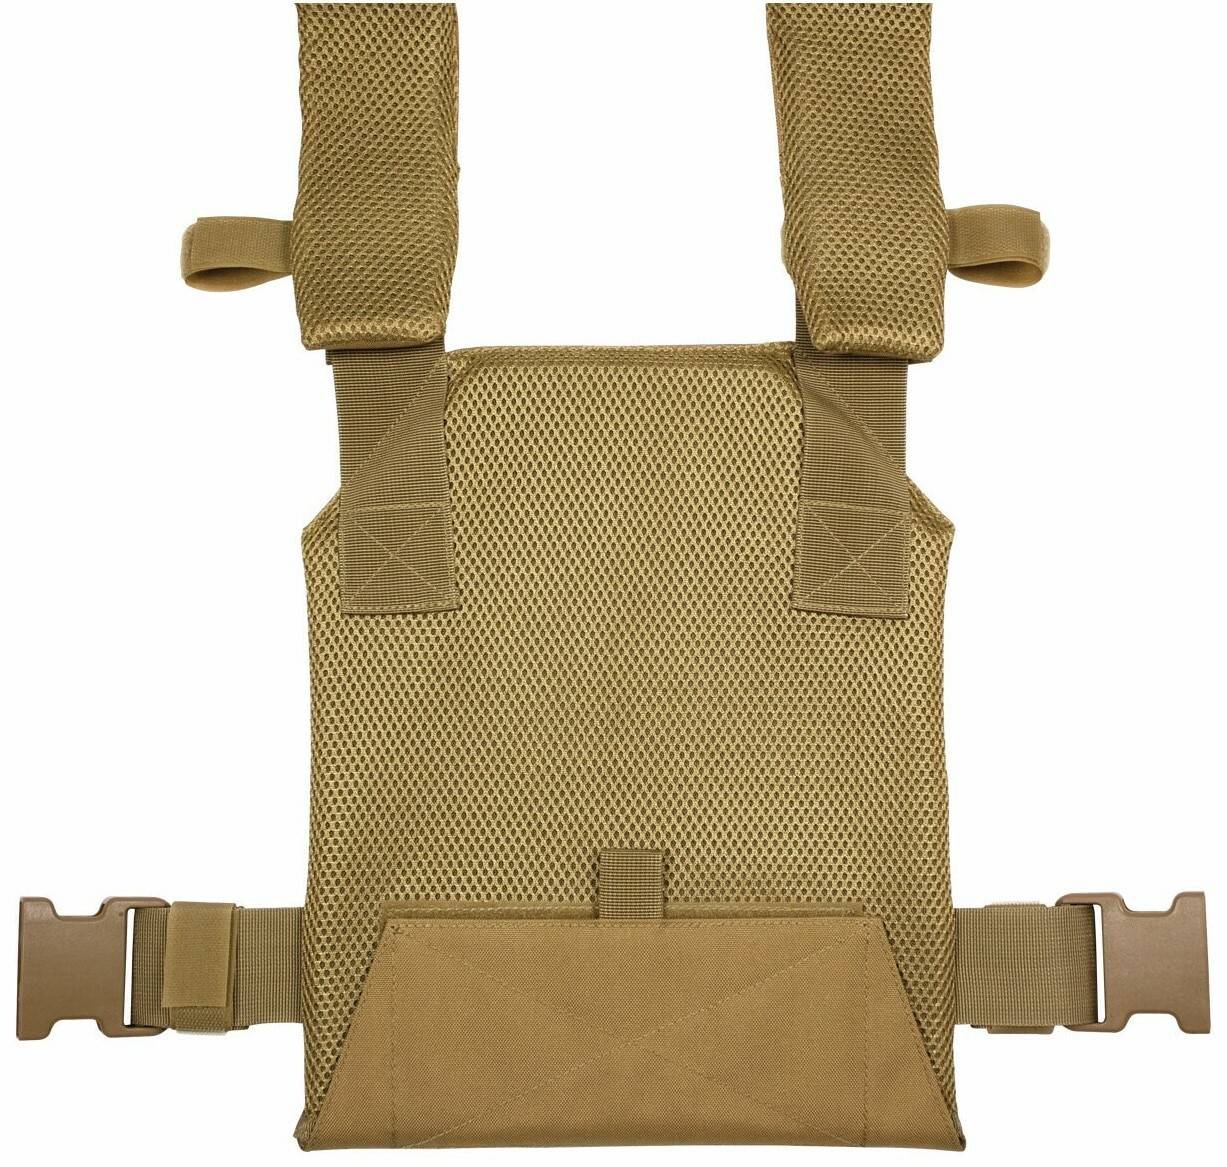 Red Rock Outdoor Gear MOLLE Plate Carrier